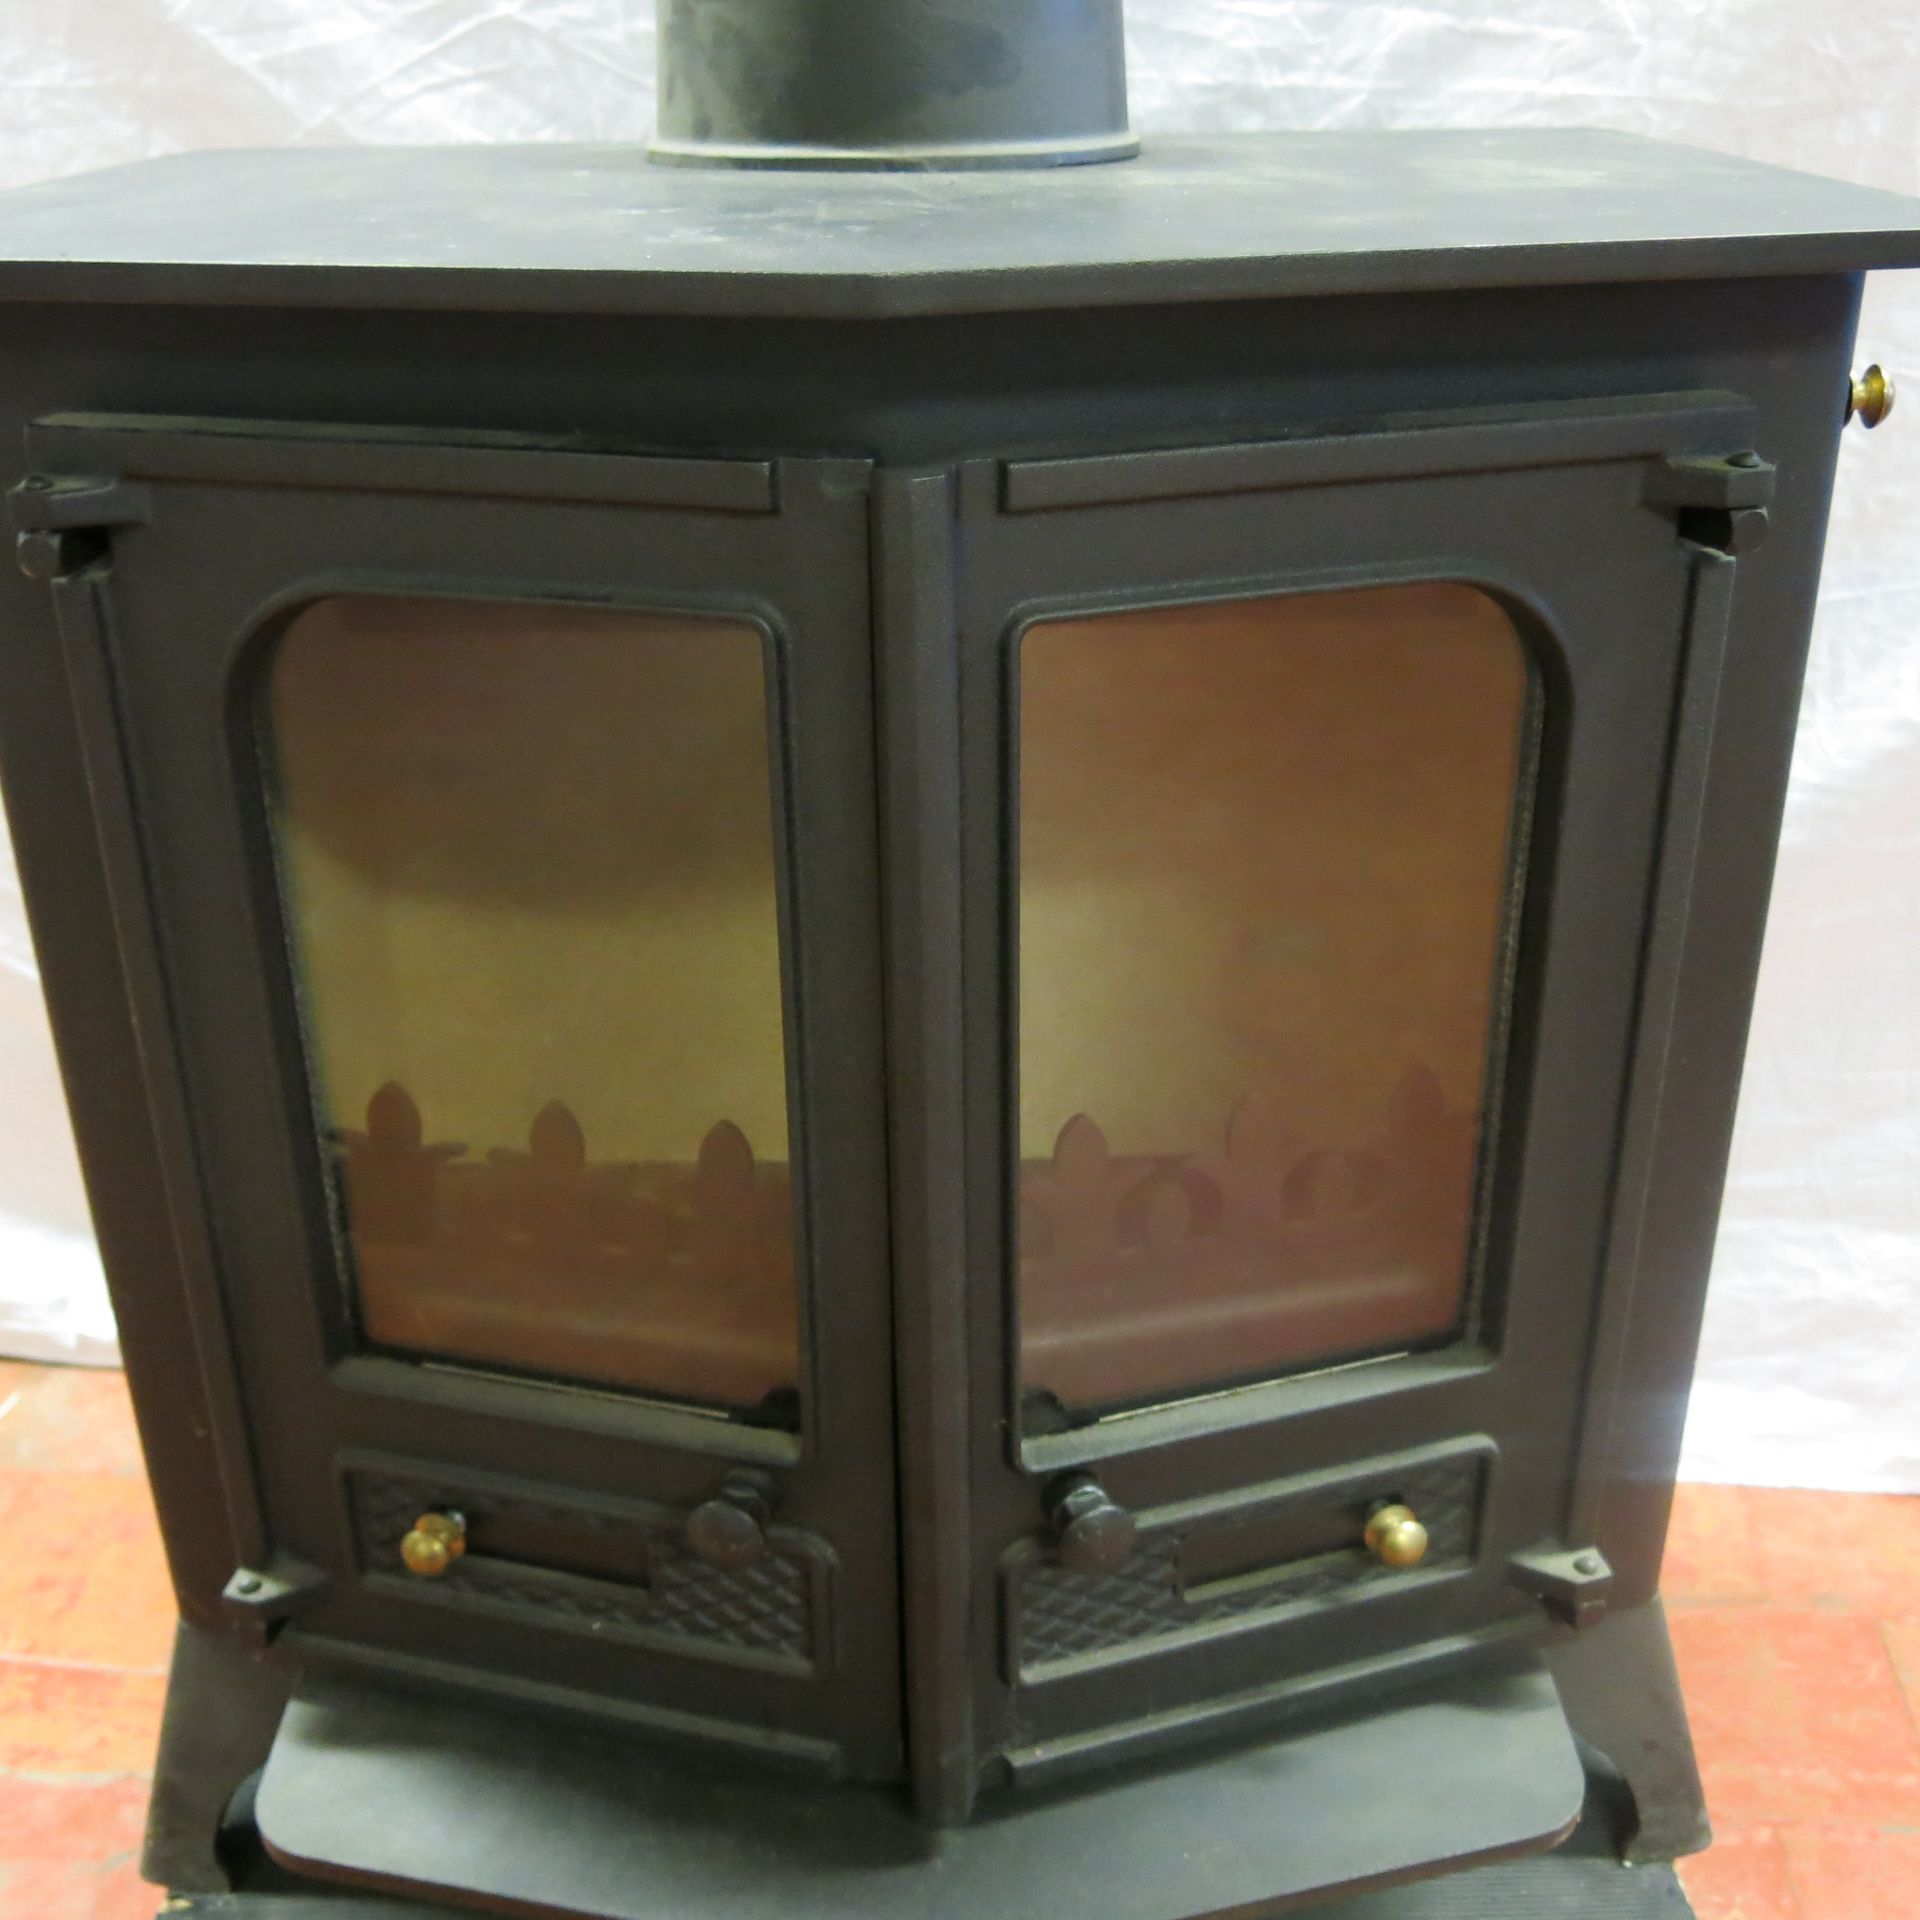 Charnwood Country 12, Wood Burning Stove, Heat Output 12KW (As Viewed) - Image 2 of 6